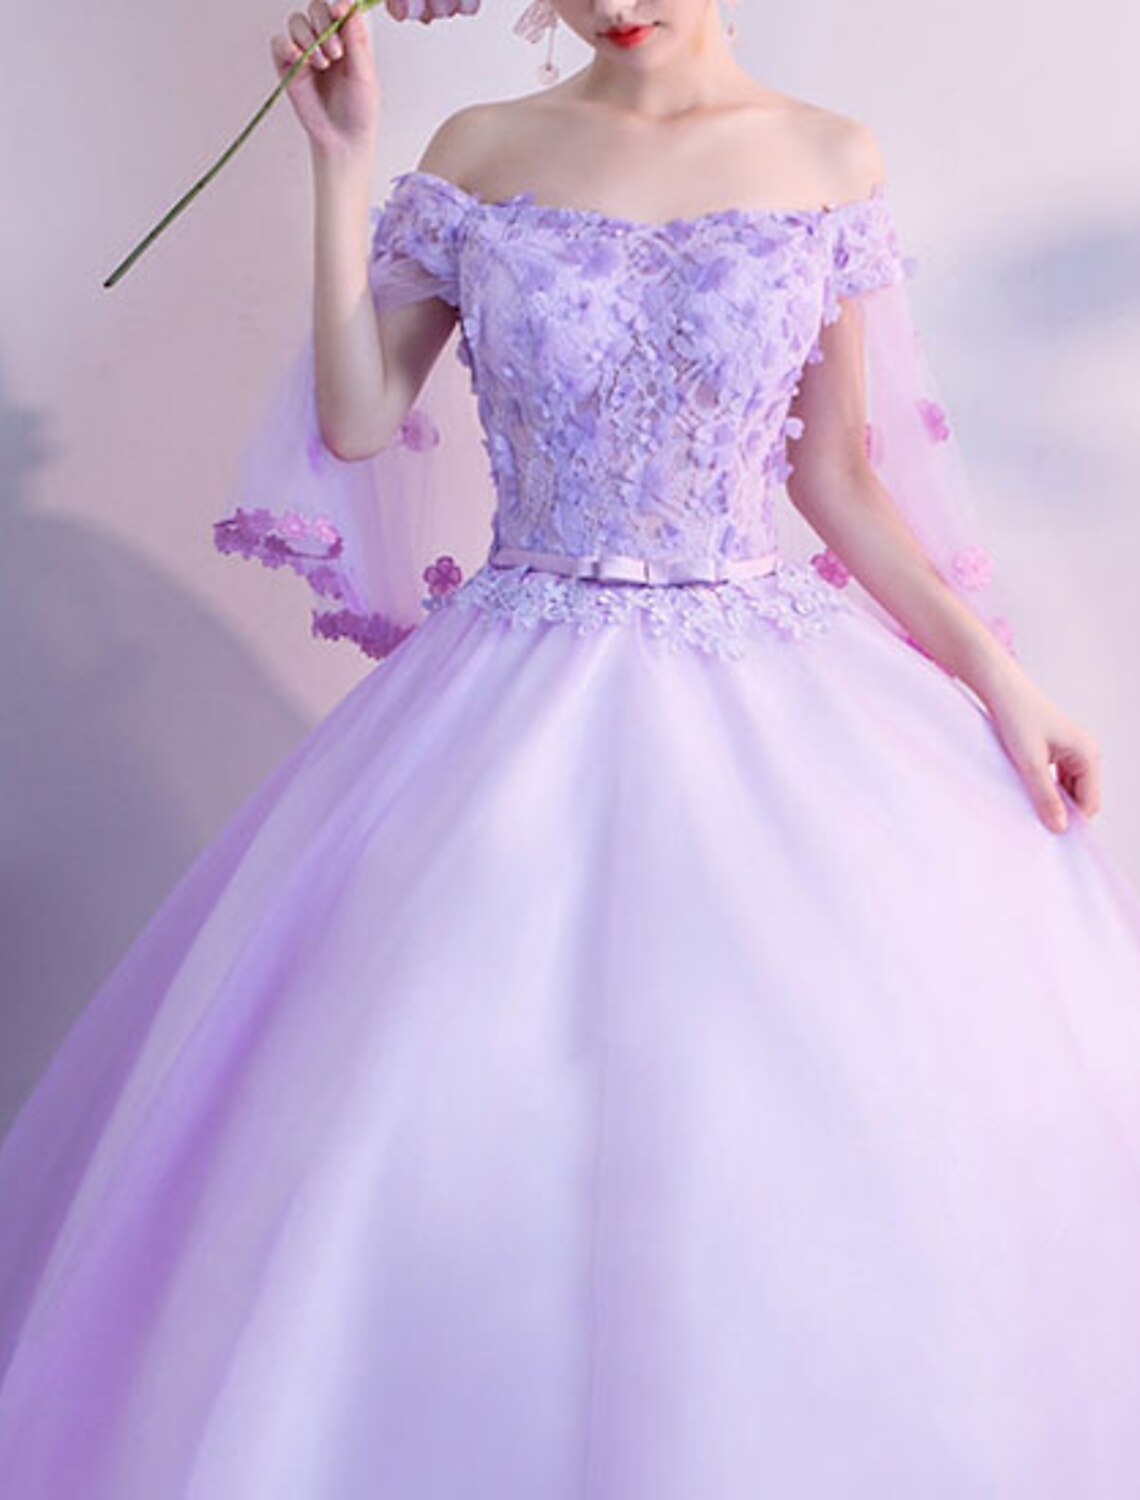 Ball Gown Elegant Floral Quinceanera Formal Evening Dress Off Shoulder Half Sleeve Floor Length Tulle with Appliques